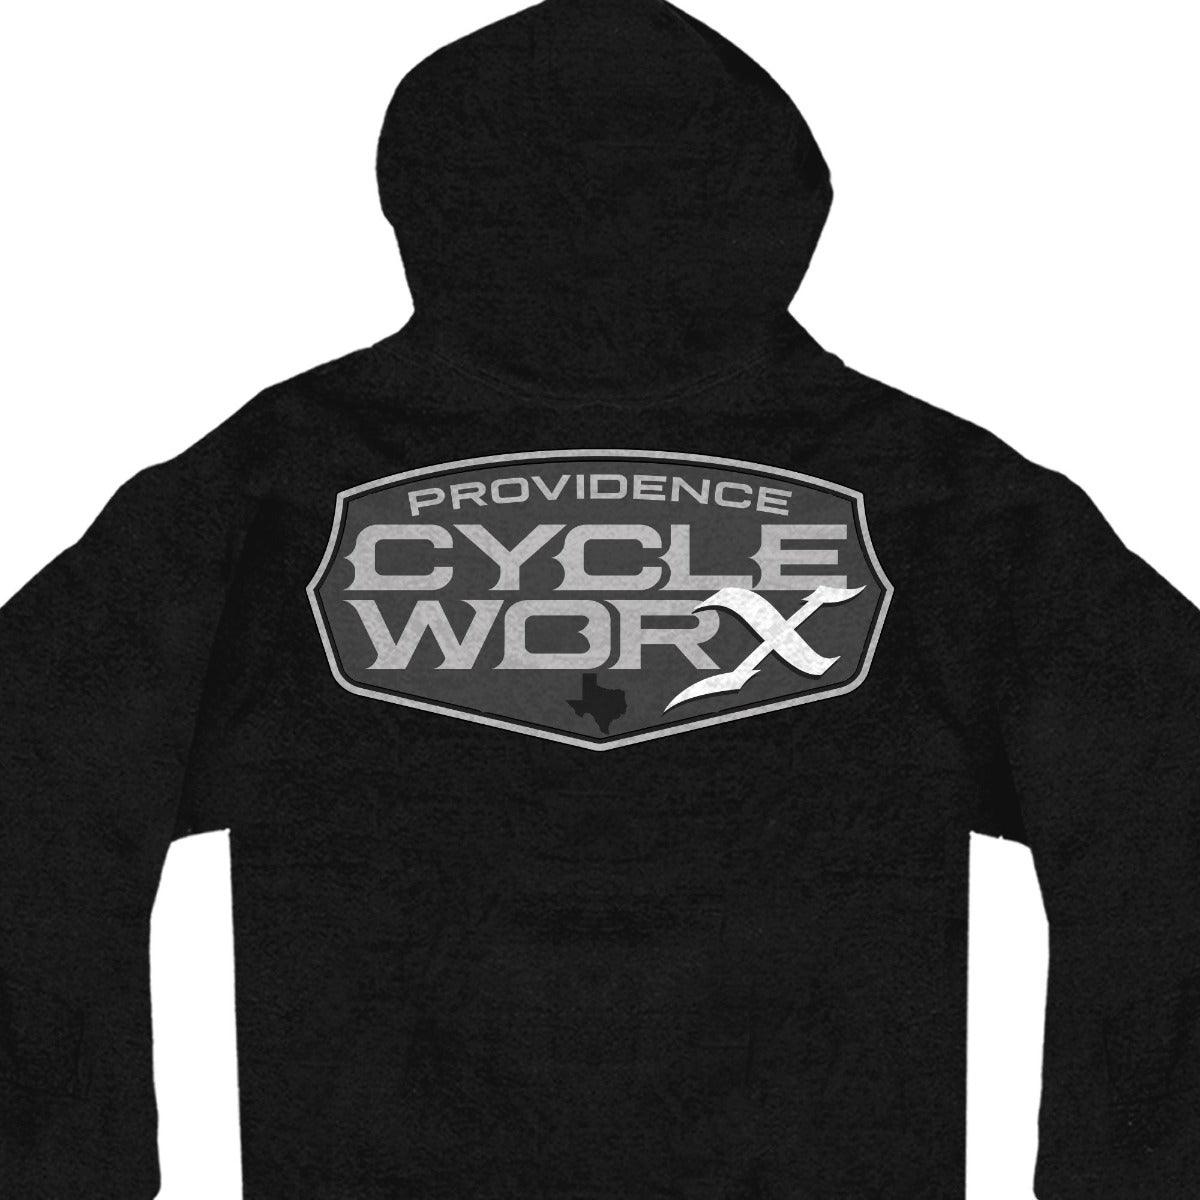 Hot Leathers Official Providence Cycle Worx Gray Texas Zip Up Sweatshirt - American Legend Rider